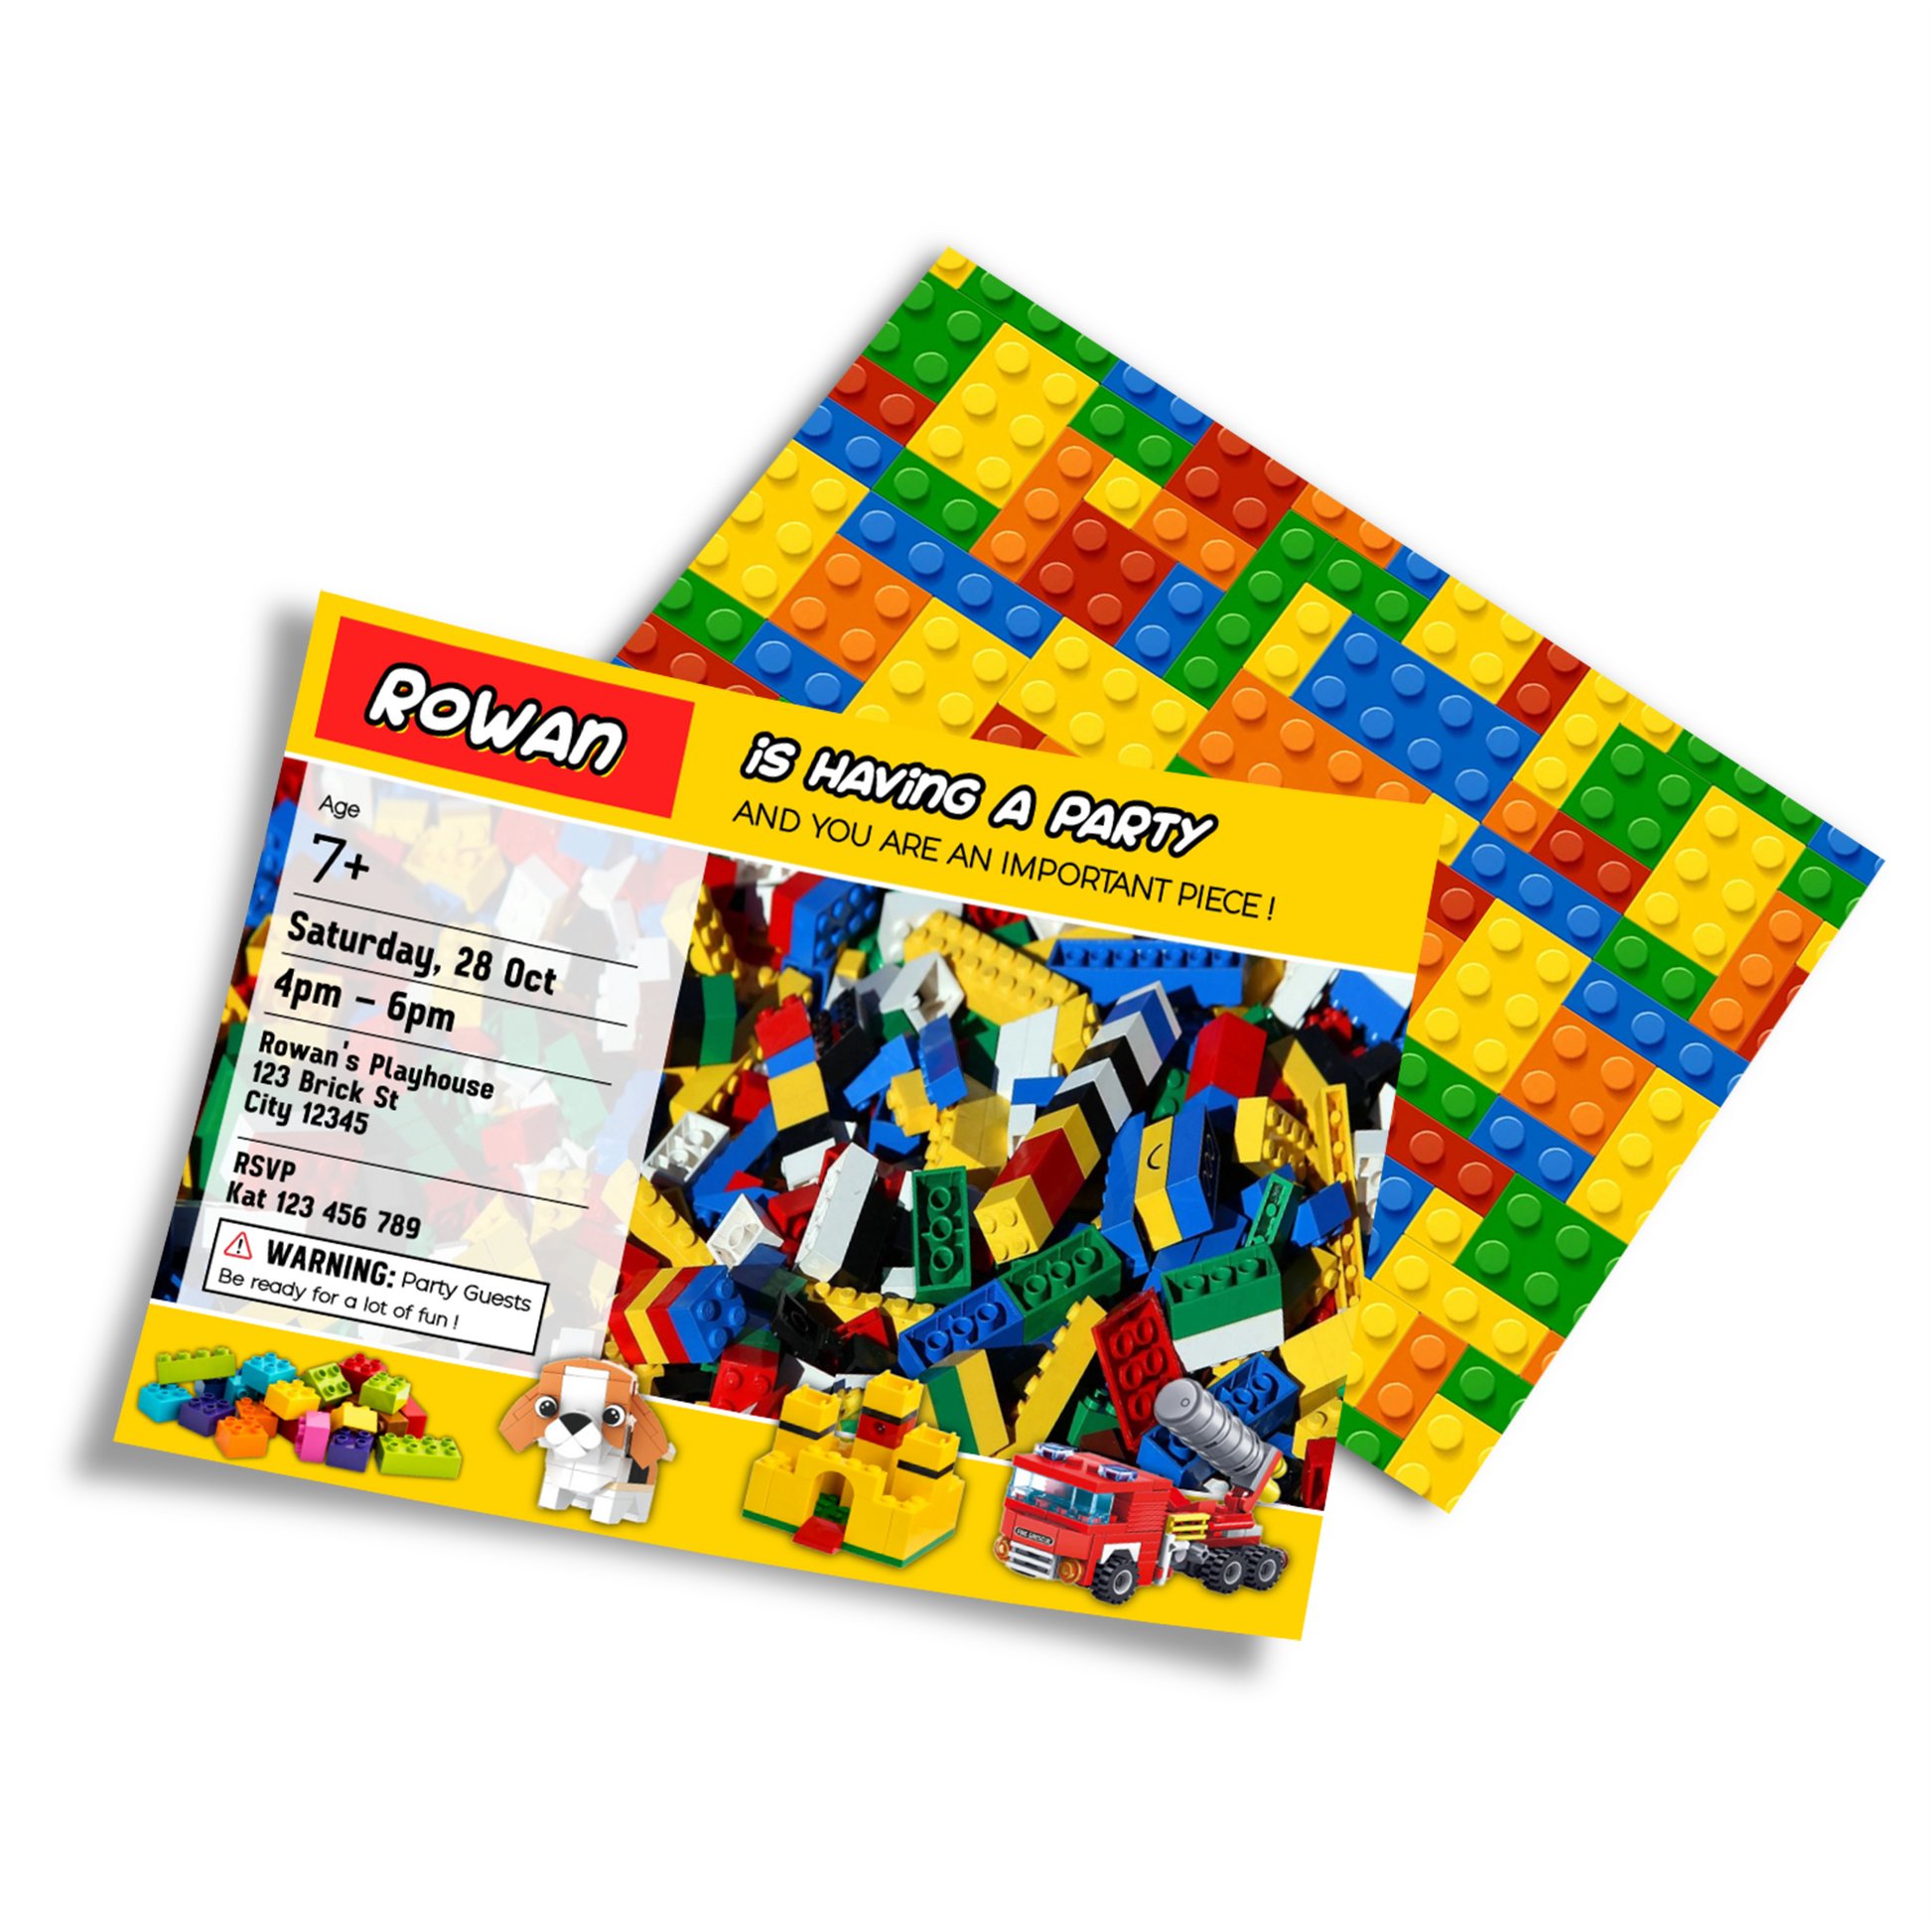 Personalized birthday card invitations with a Lego, Building Blocks theme